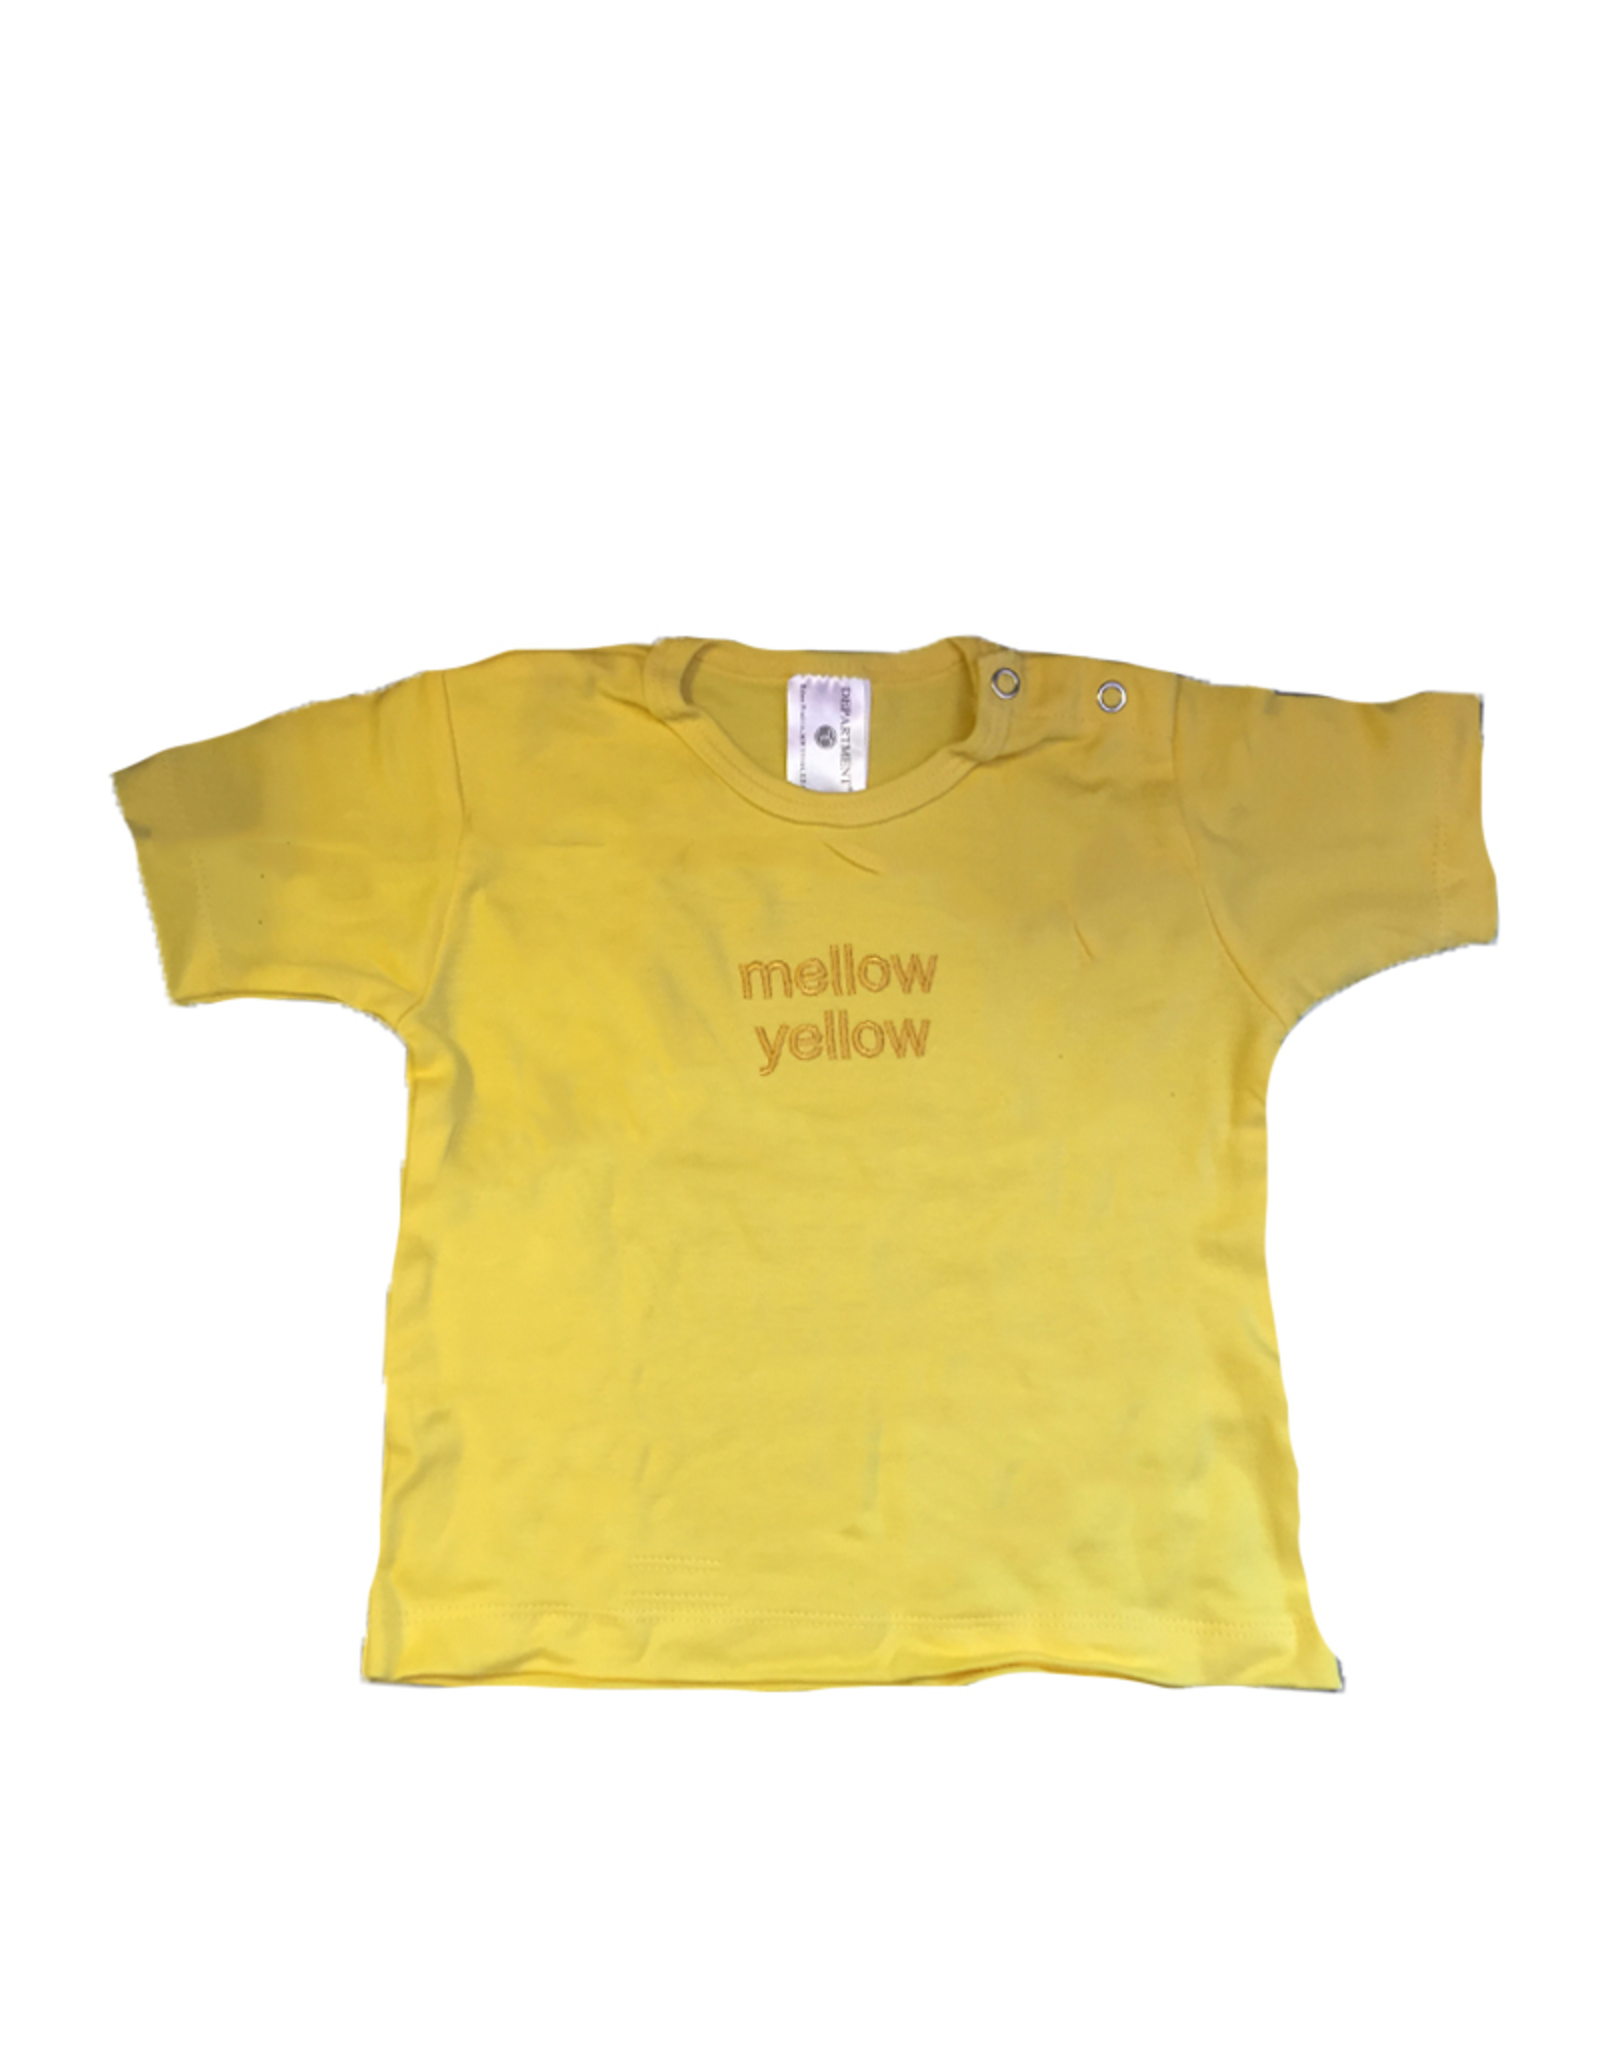 Paint Rags Embroidered Baby T-Shirt - Mellow Yellow 12-18 Month